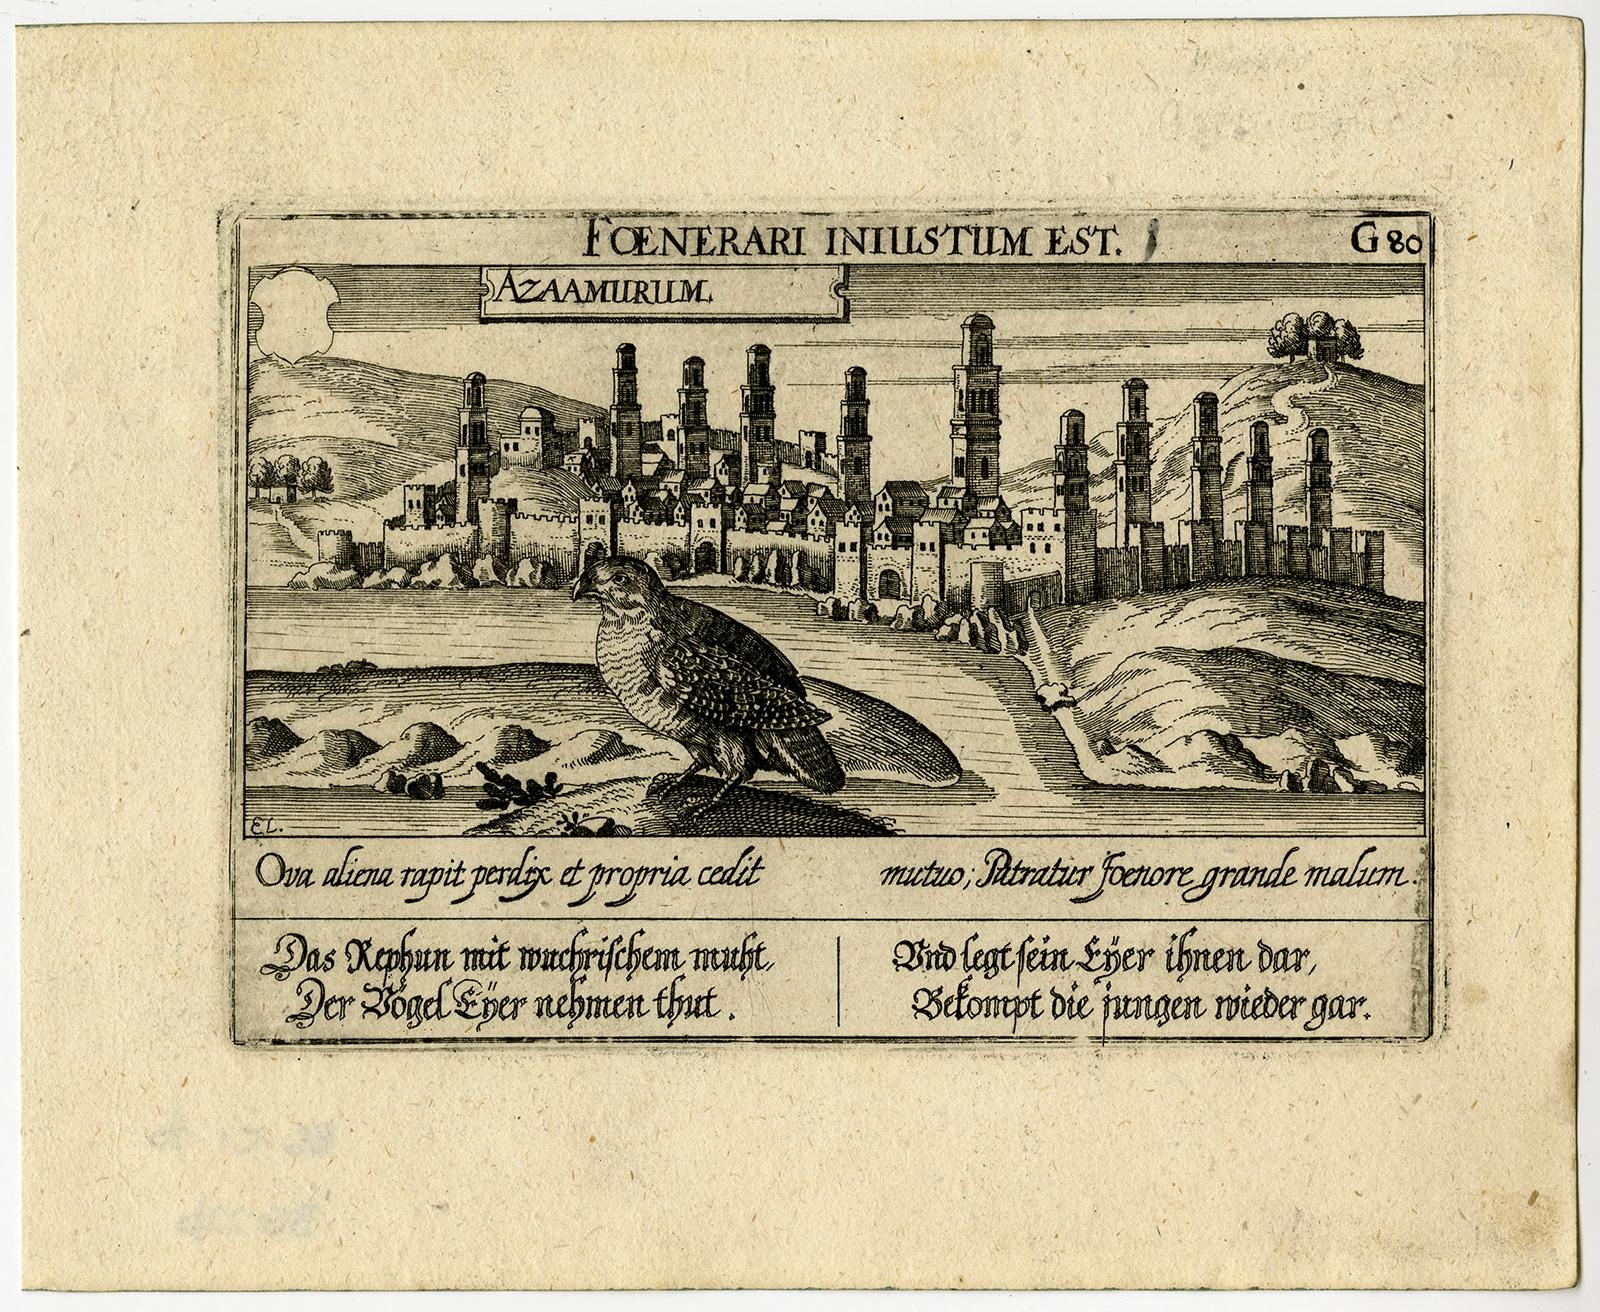 Antique print, titled: 'Azaamurum.' - Caption in the top reads: 'Foenerari iniustum est'. 

A partridge in the foreground, with the walled city (Azemmour in Morocco) behind.

From: 'Thesauri Philo-Politici' / 'Thesaurus Philopoliticus' /